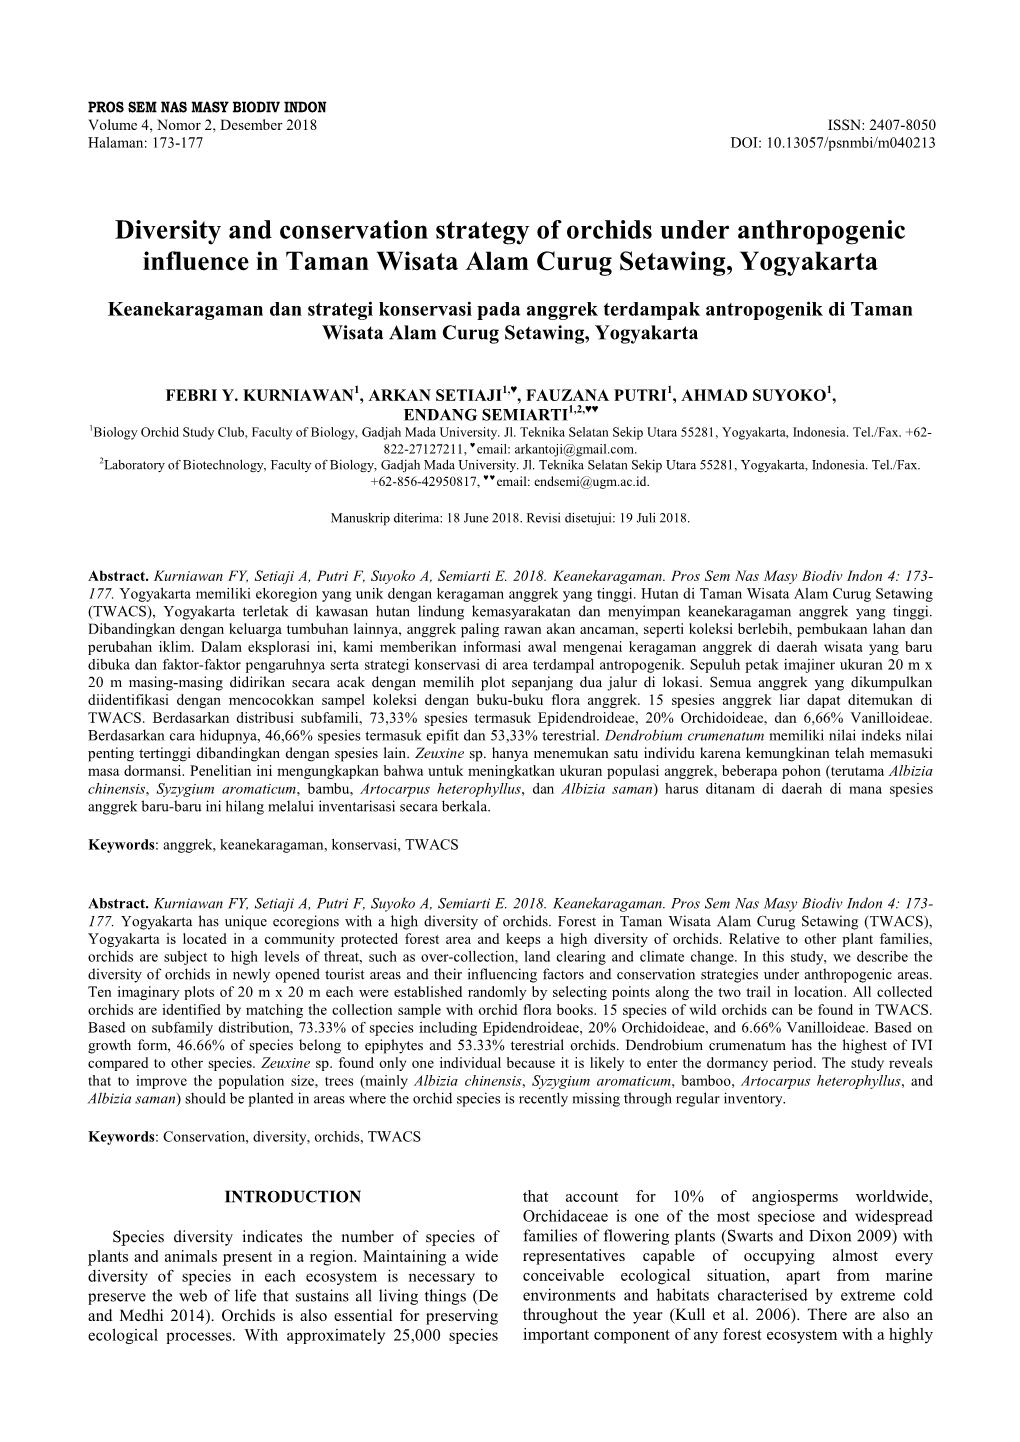 Diversity and Conservation Strategy of Orchids Under Anthropogenic Influence in Taman Wisata Alam Curug Setawing, Yogyakarta